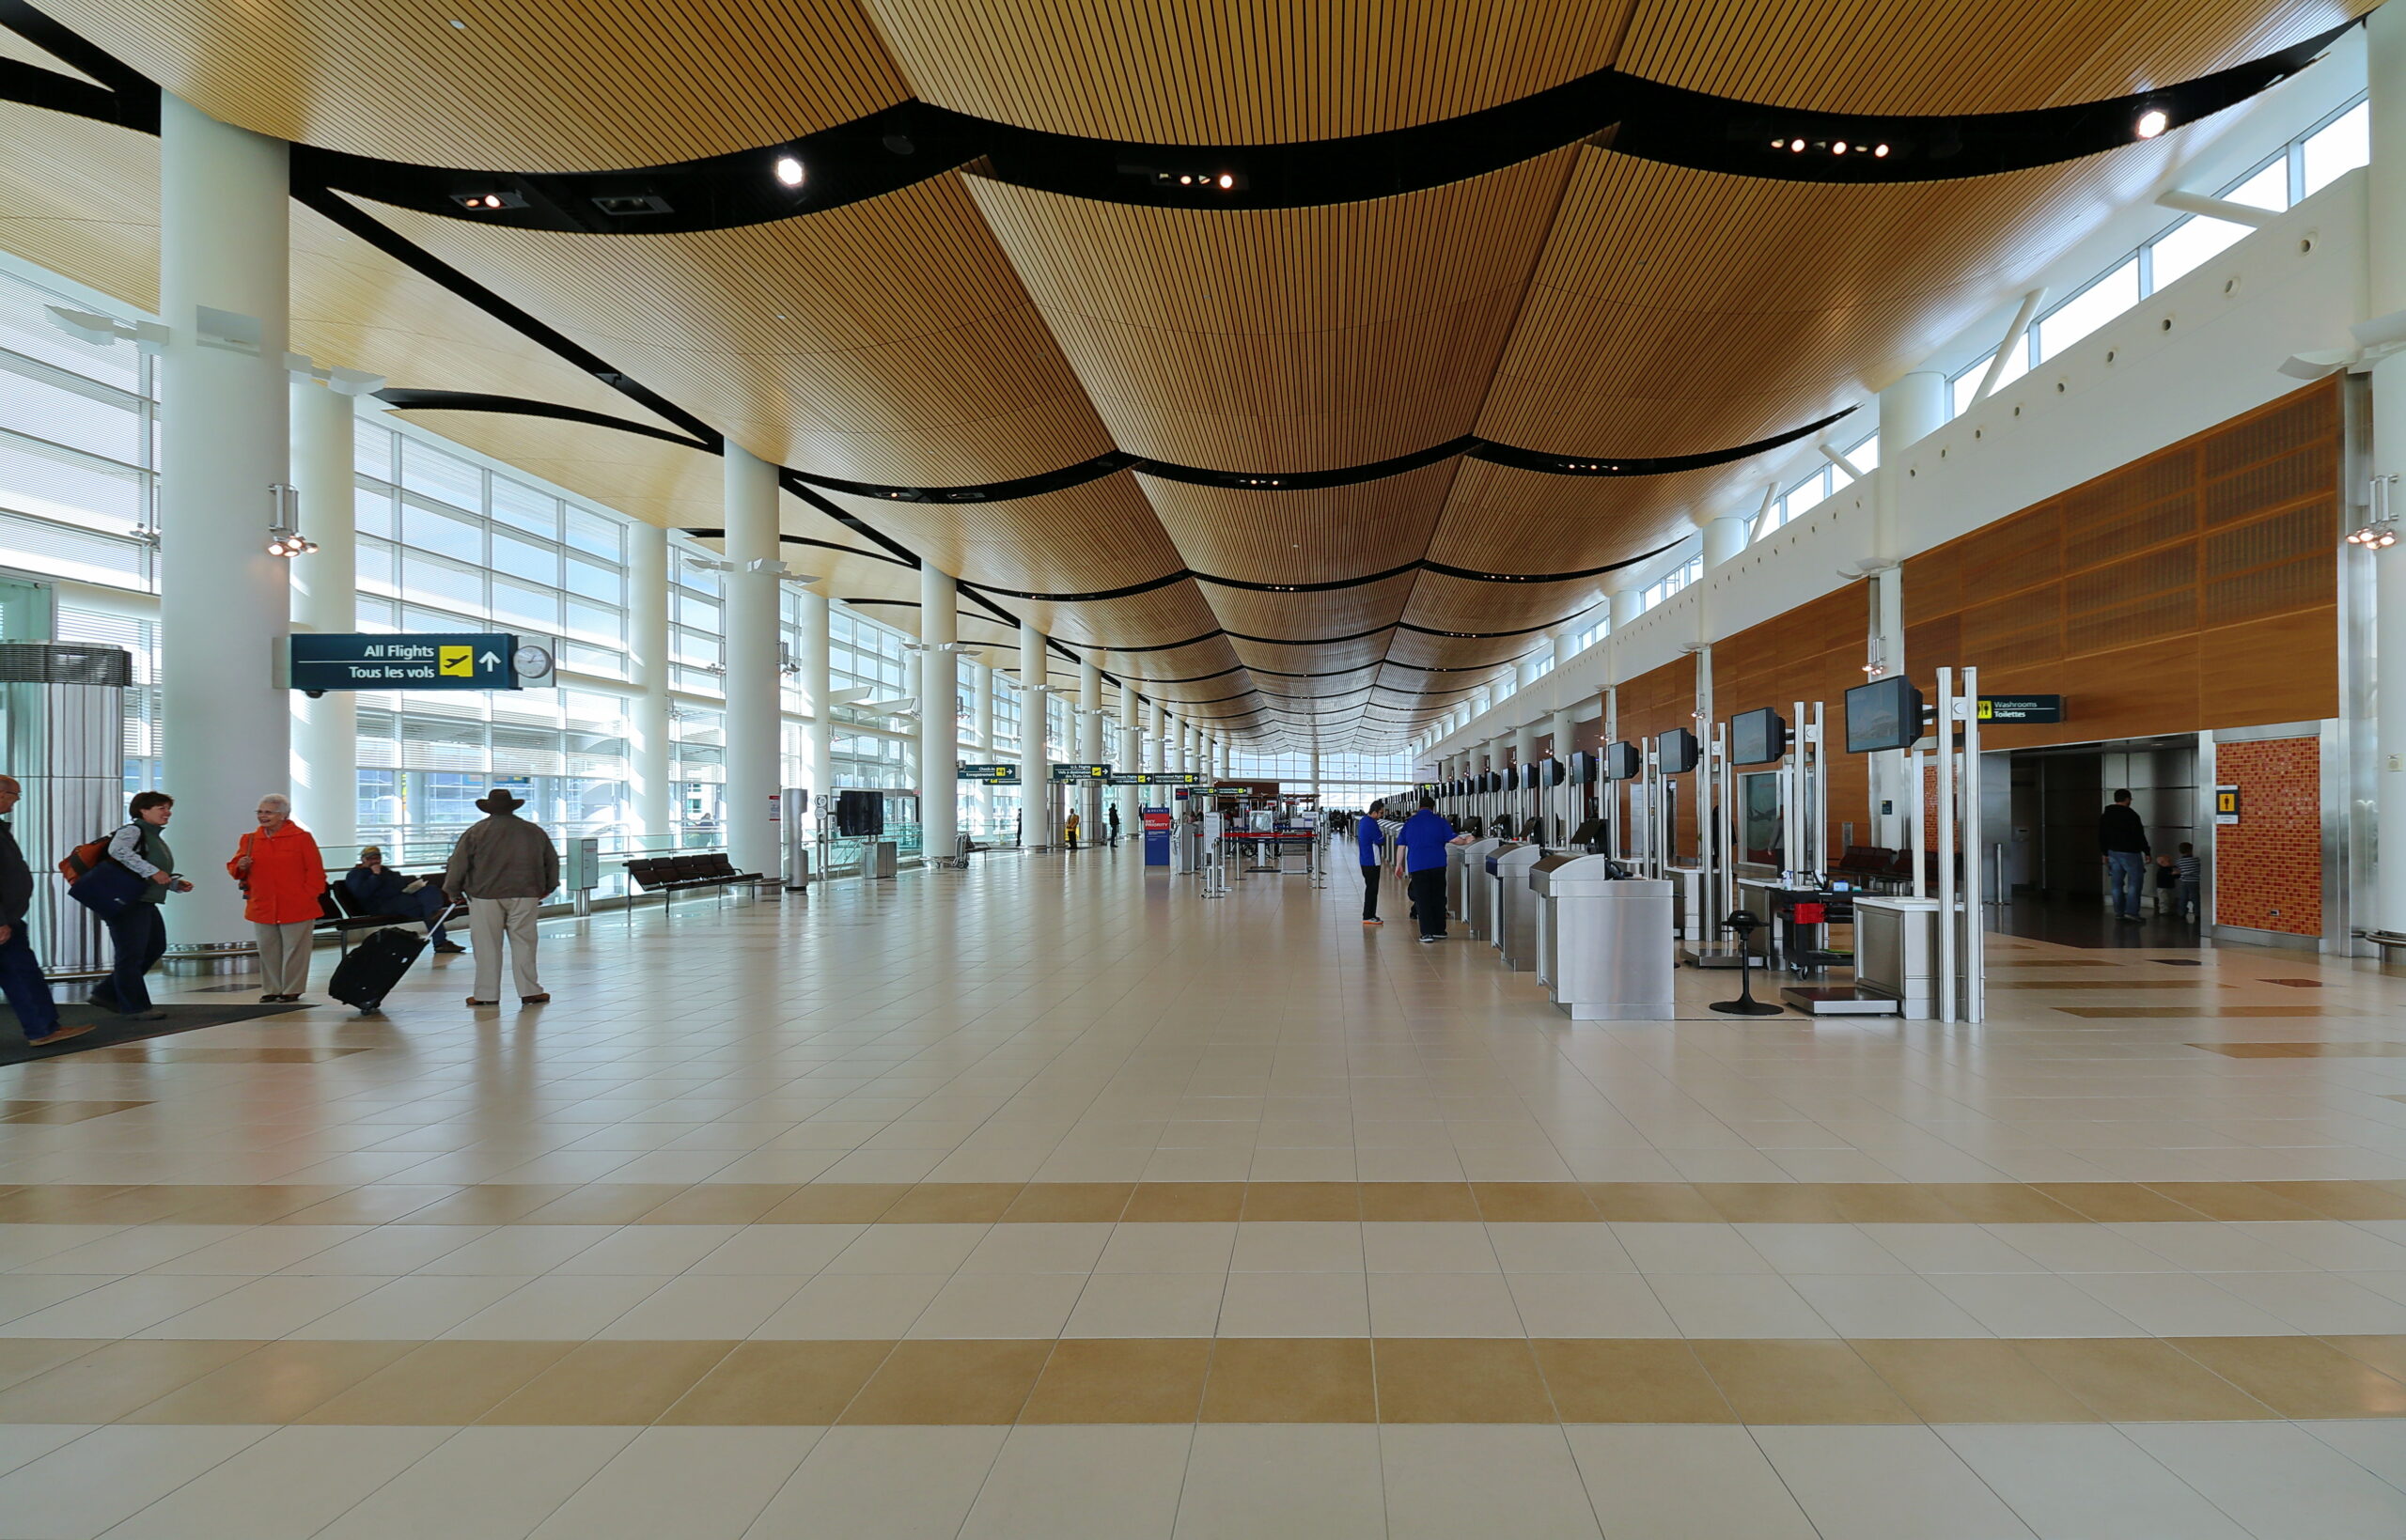 <p>Winnipeg Airport could benefit from expanding its culinary offerings and implementing strategies to manage terminal crowding during peak times.</p><p>Remember to scroll up and hit the ‘Follow’ button to keep up with the newest stories from Seattle Travel on your Microsoft Start feed or MSN homepage!</p>